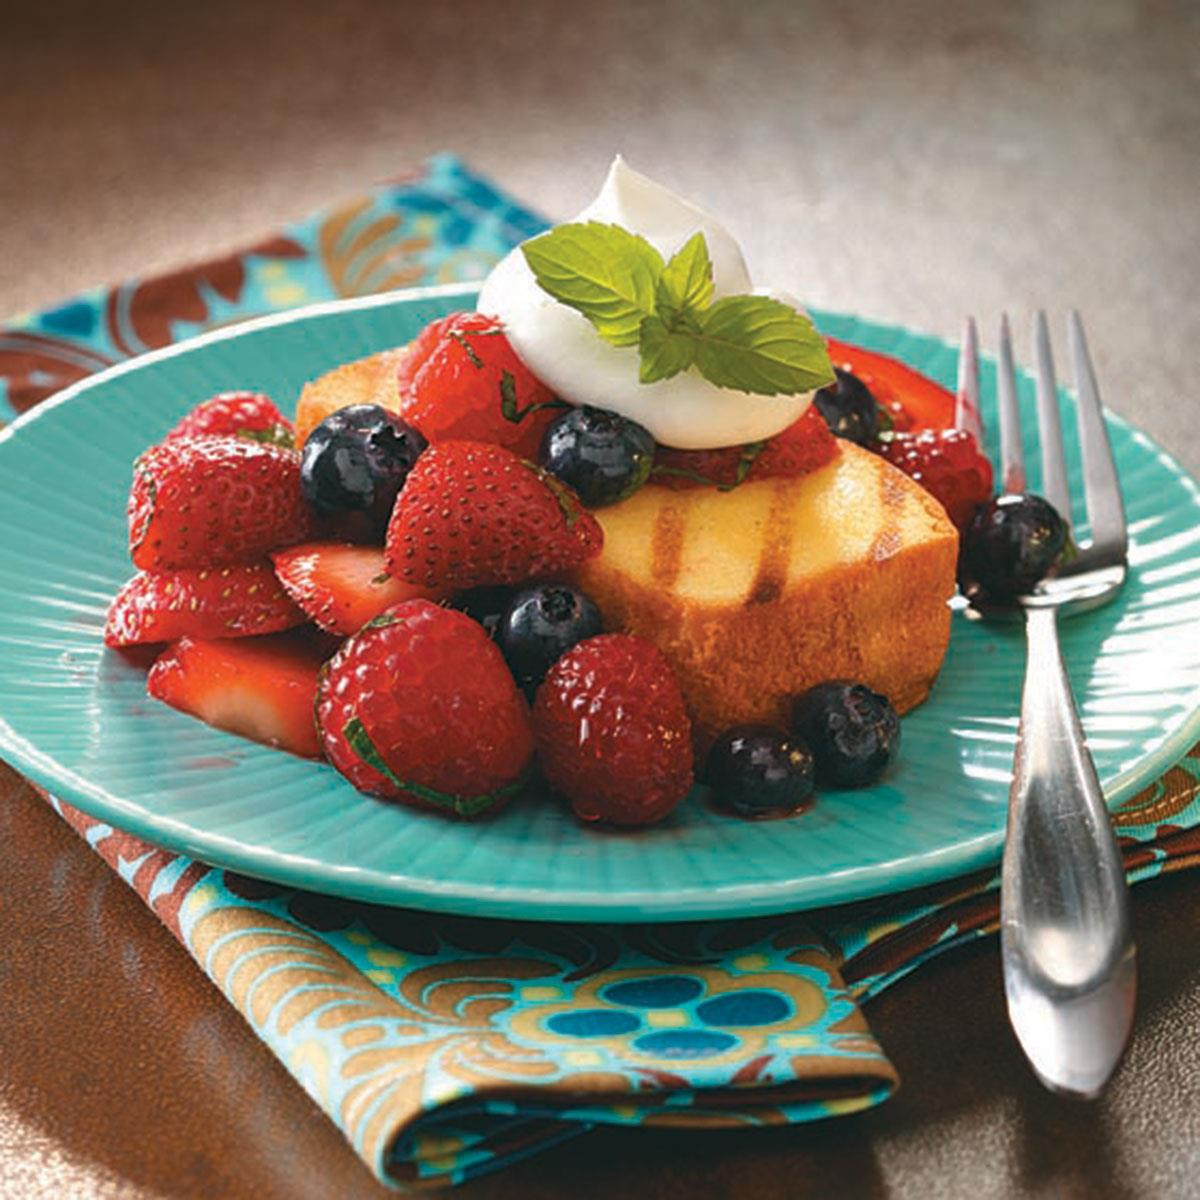 Grilled Pound Cake
 Grilled Pound Cake with Berries Recipe